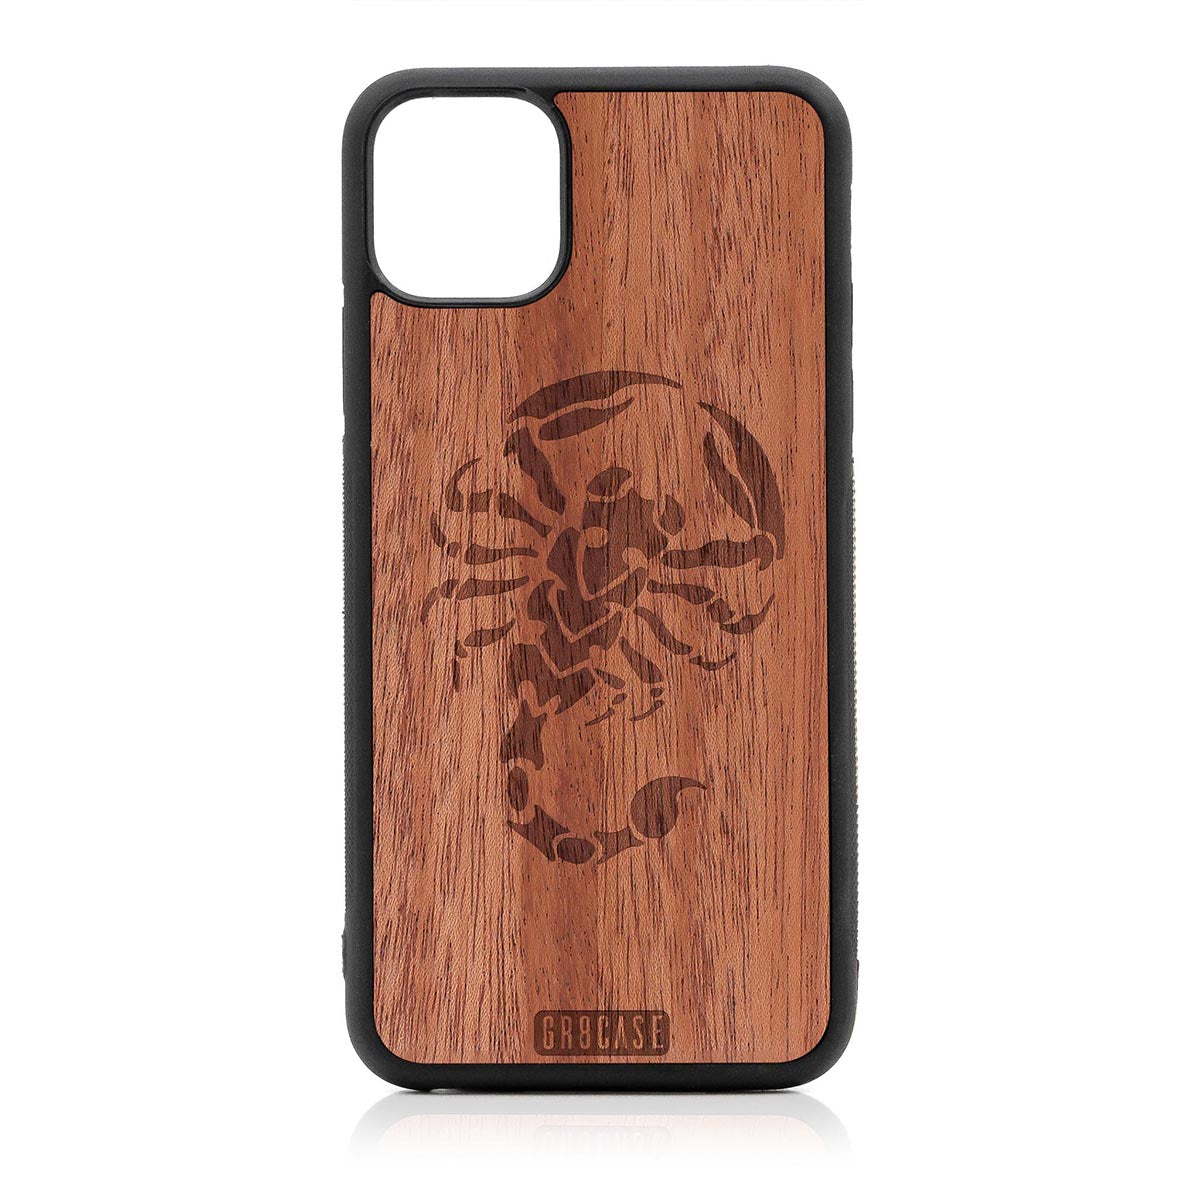 Scorpion Design Wood Case For iPhone 11 Pro Max by GR8CASE